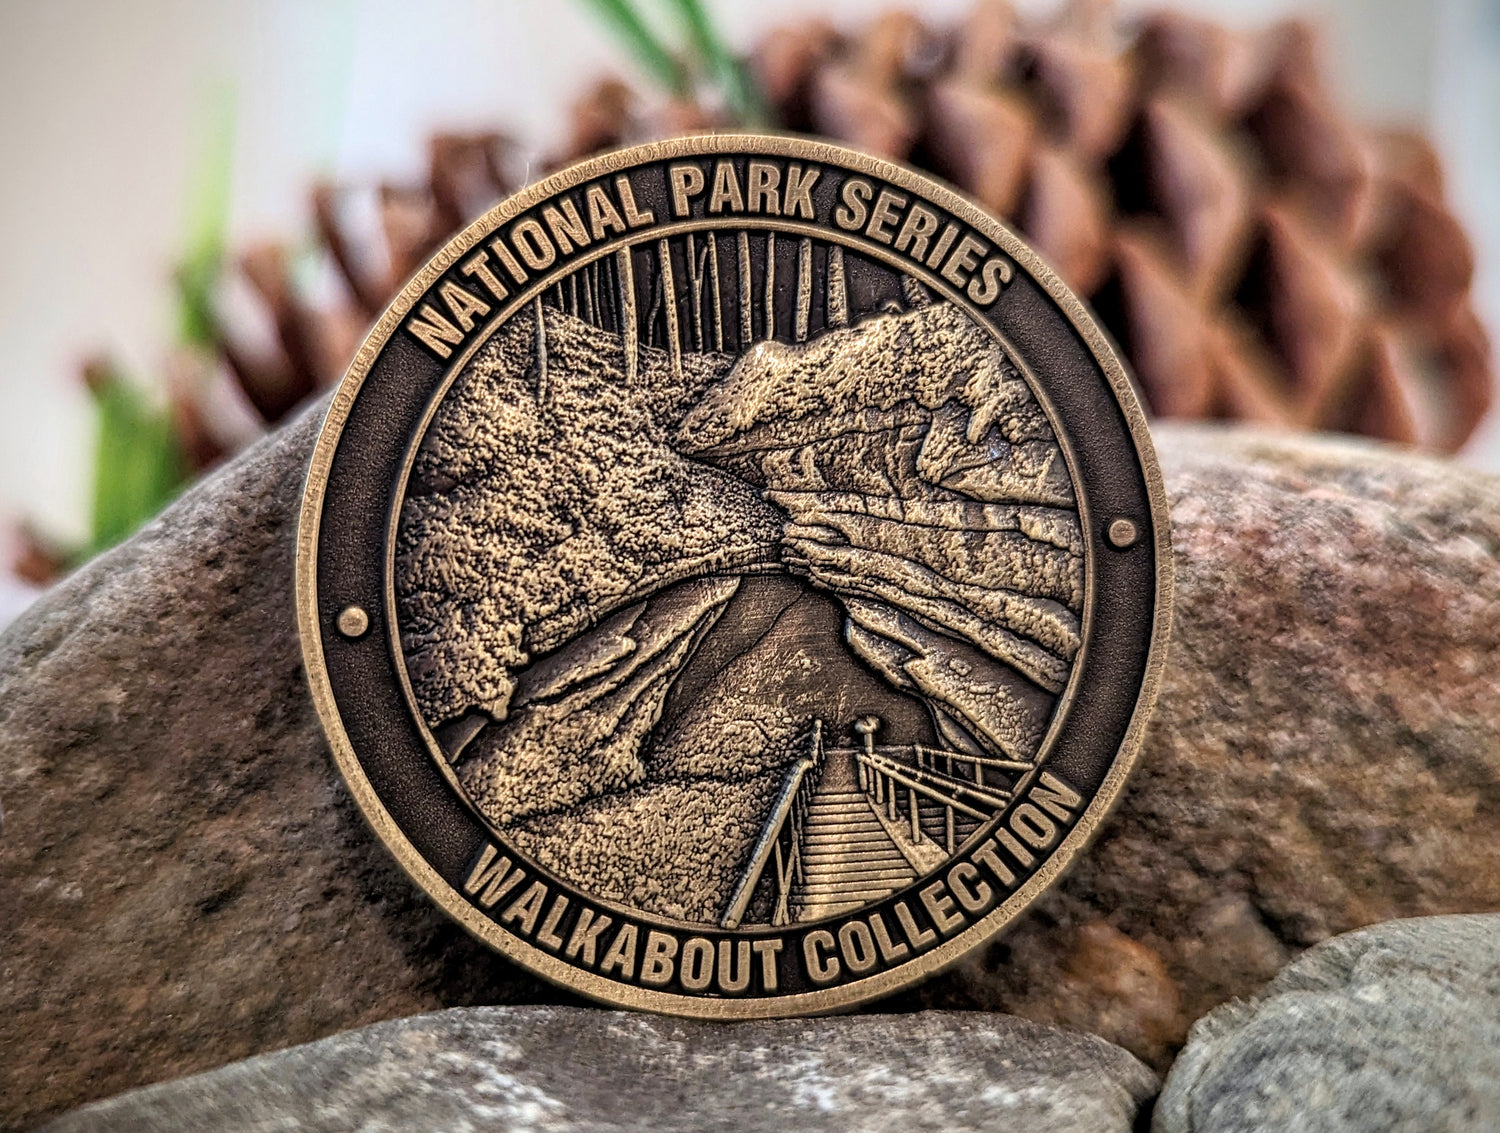 MAMMOTH CAVE NATIONAL PARK CHALLENGE COIN